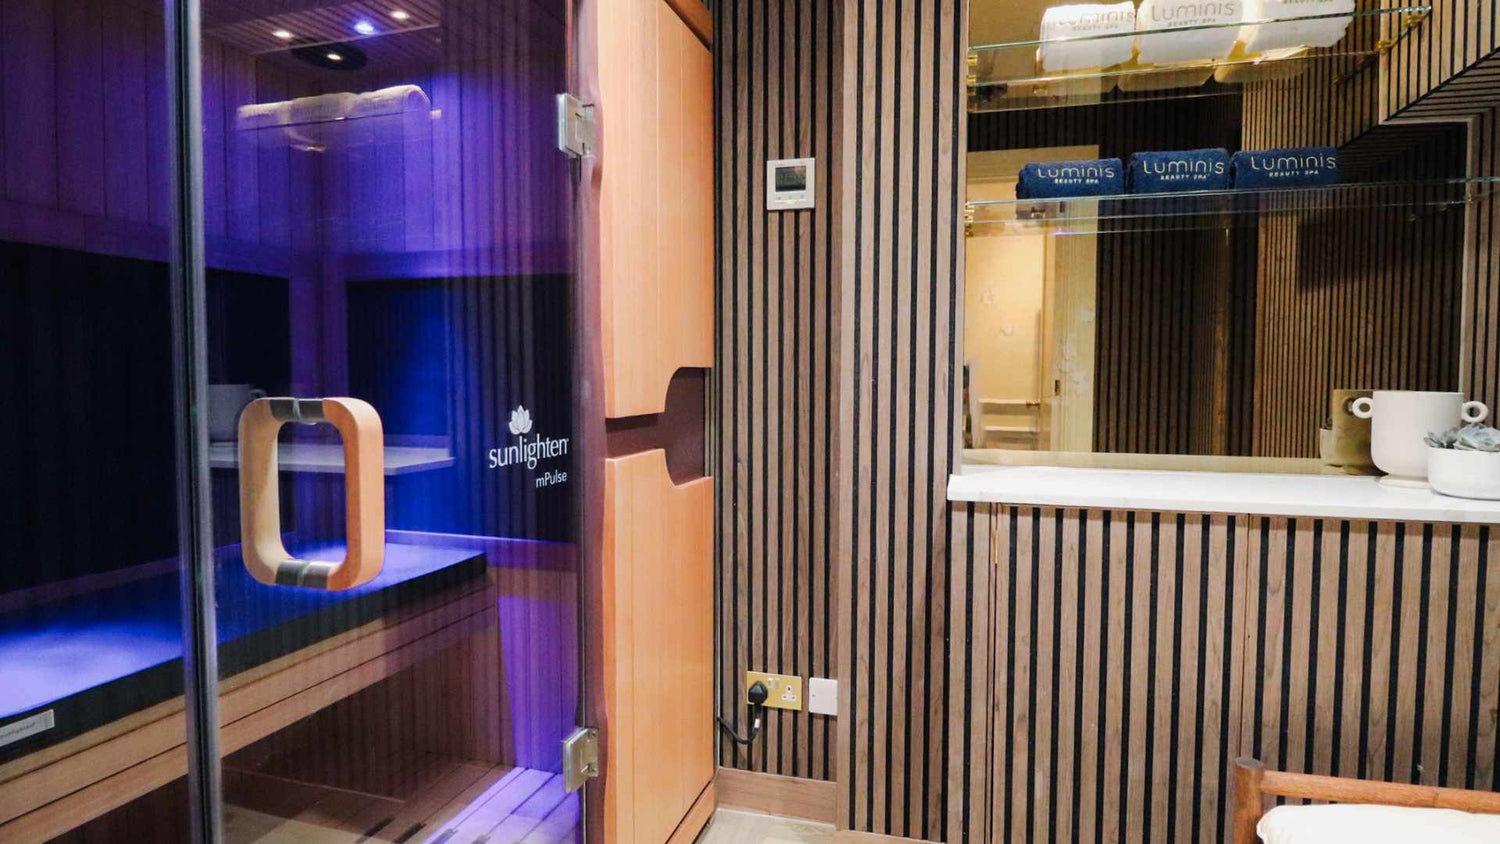 The Benefits of Regular Sessions in an Infrared Sauna